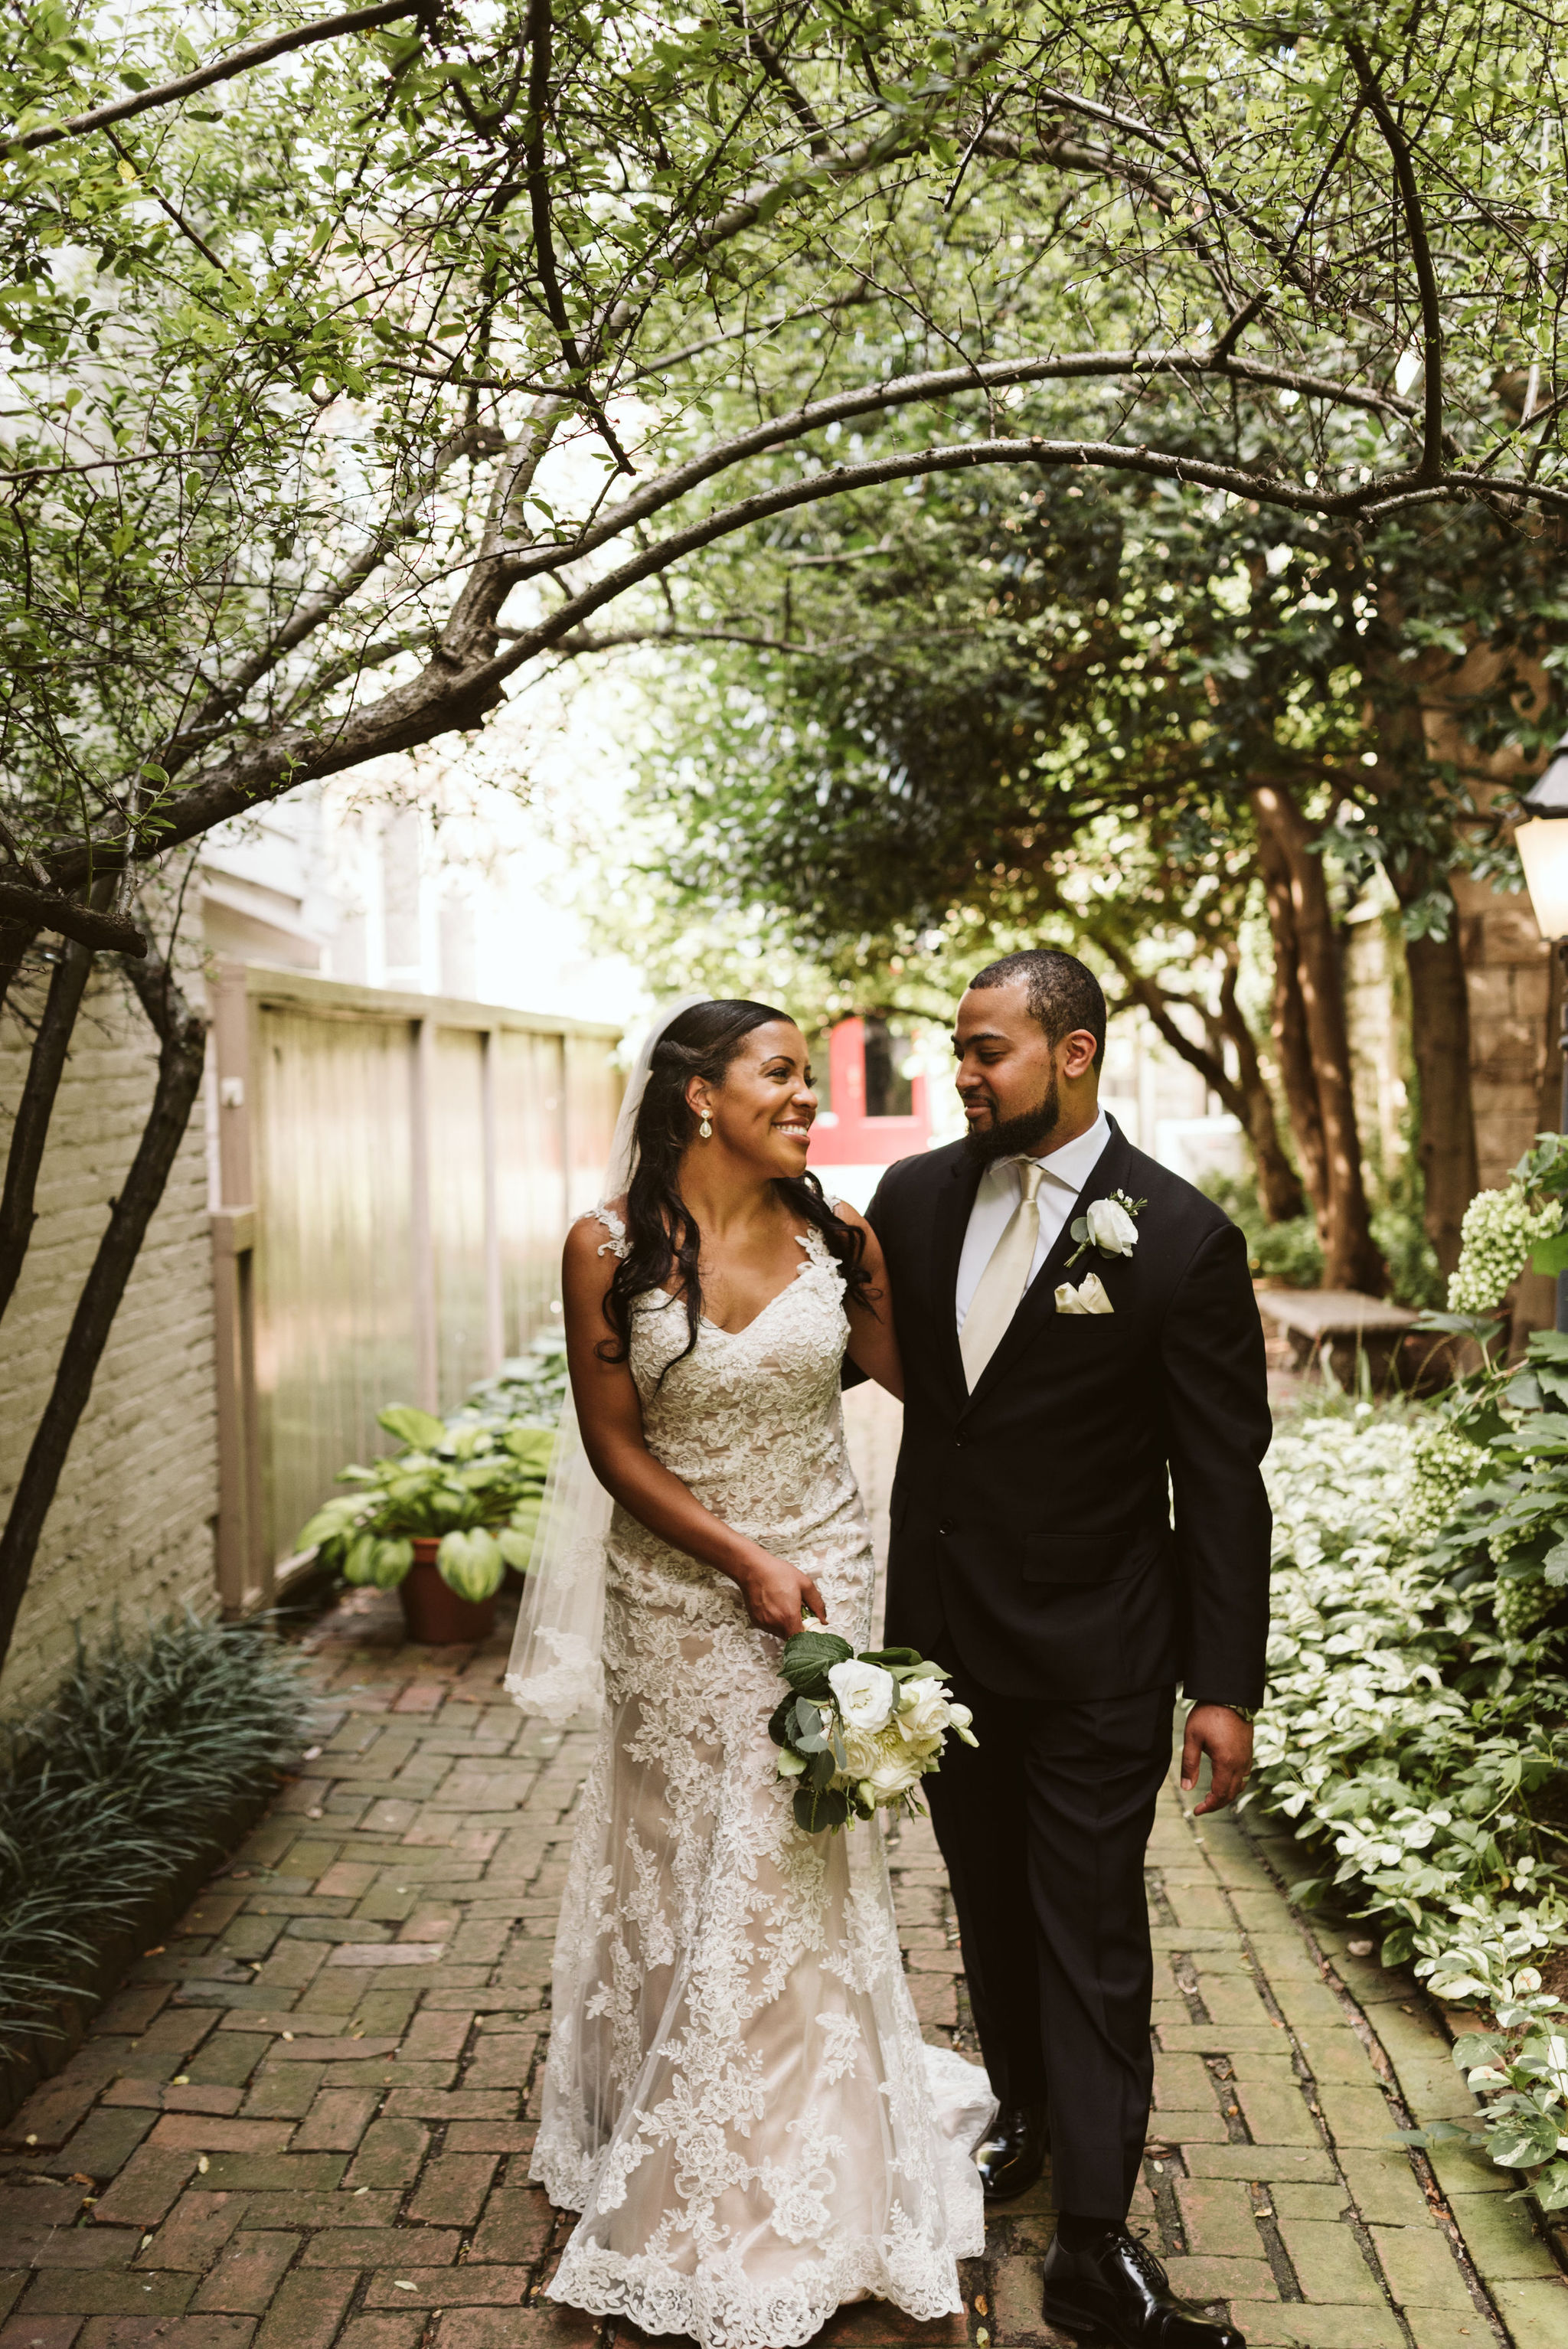  Baltimore, Maryland Wedding Photographer, Mount Vernon, Chase Court, Classic, Outdoor Ceremony, Garden, Romantic, Bride and groom Laughing Together, Lace Wedding Dress, Classic Black Suit 